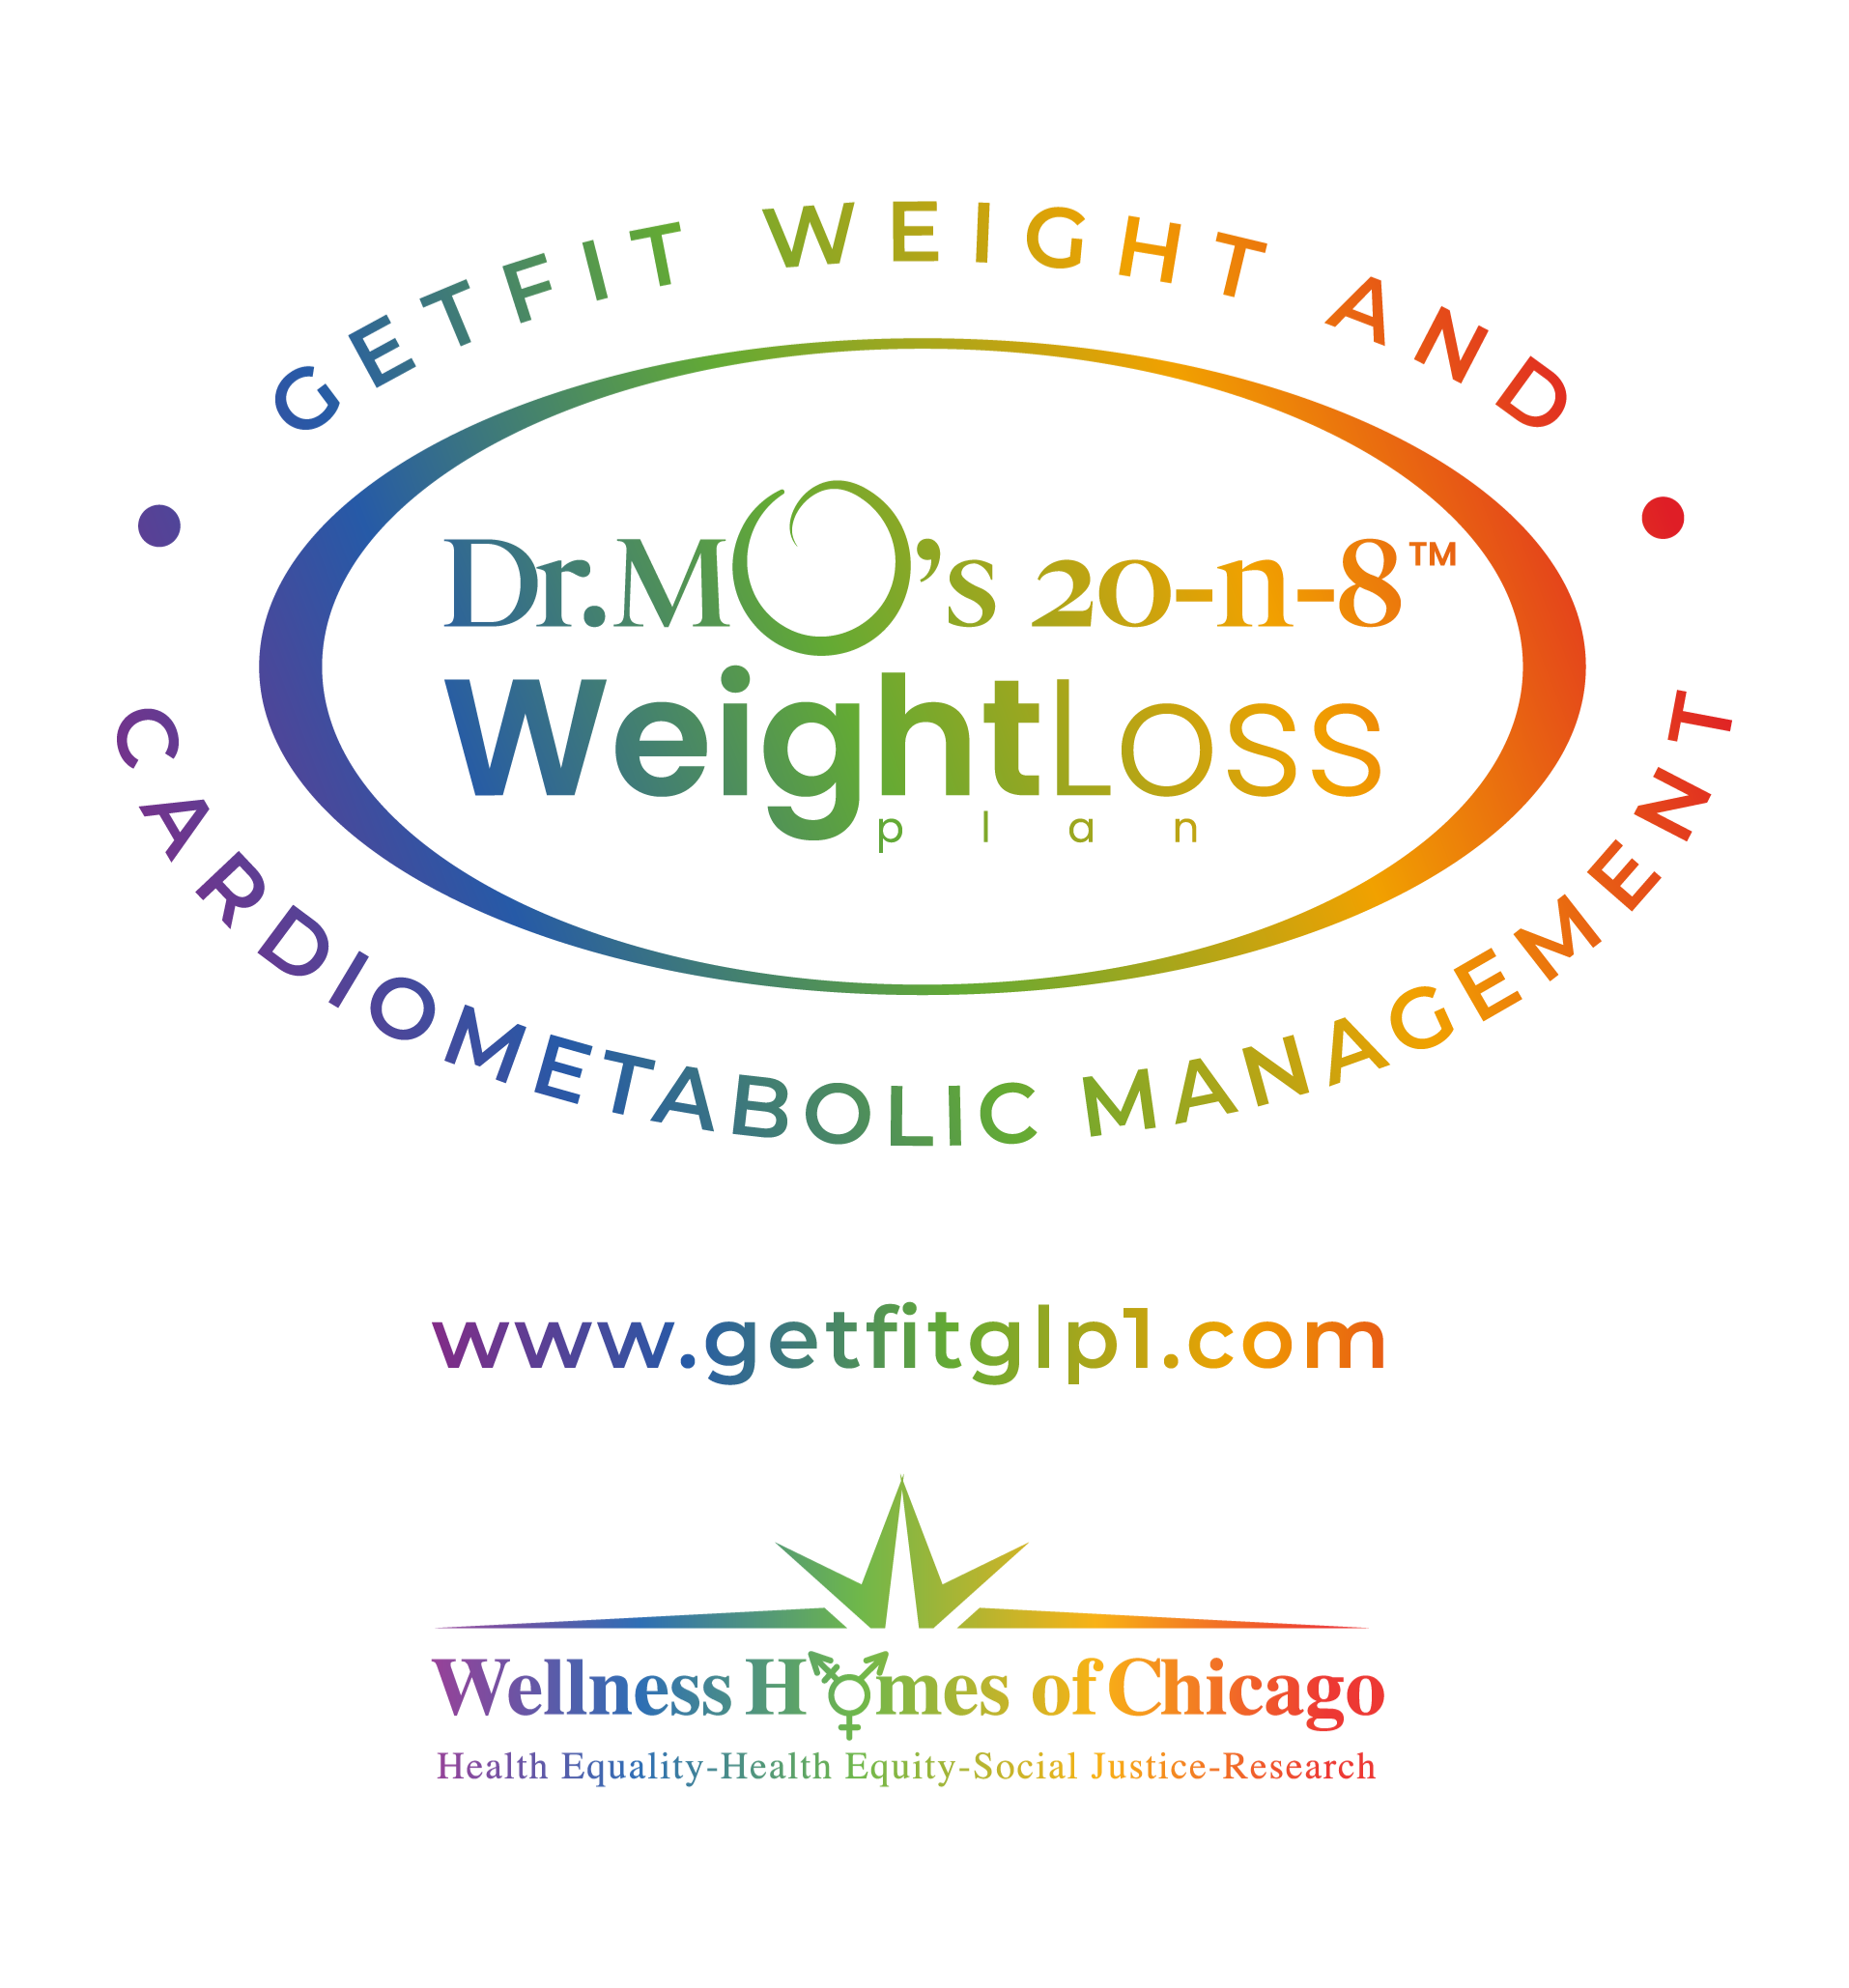 Dr. MO's 20-N-8 Weight and Cardiometabolic Management Program